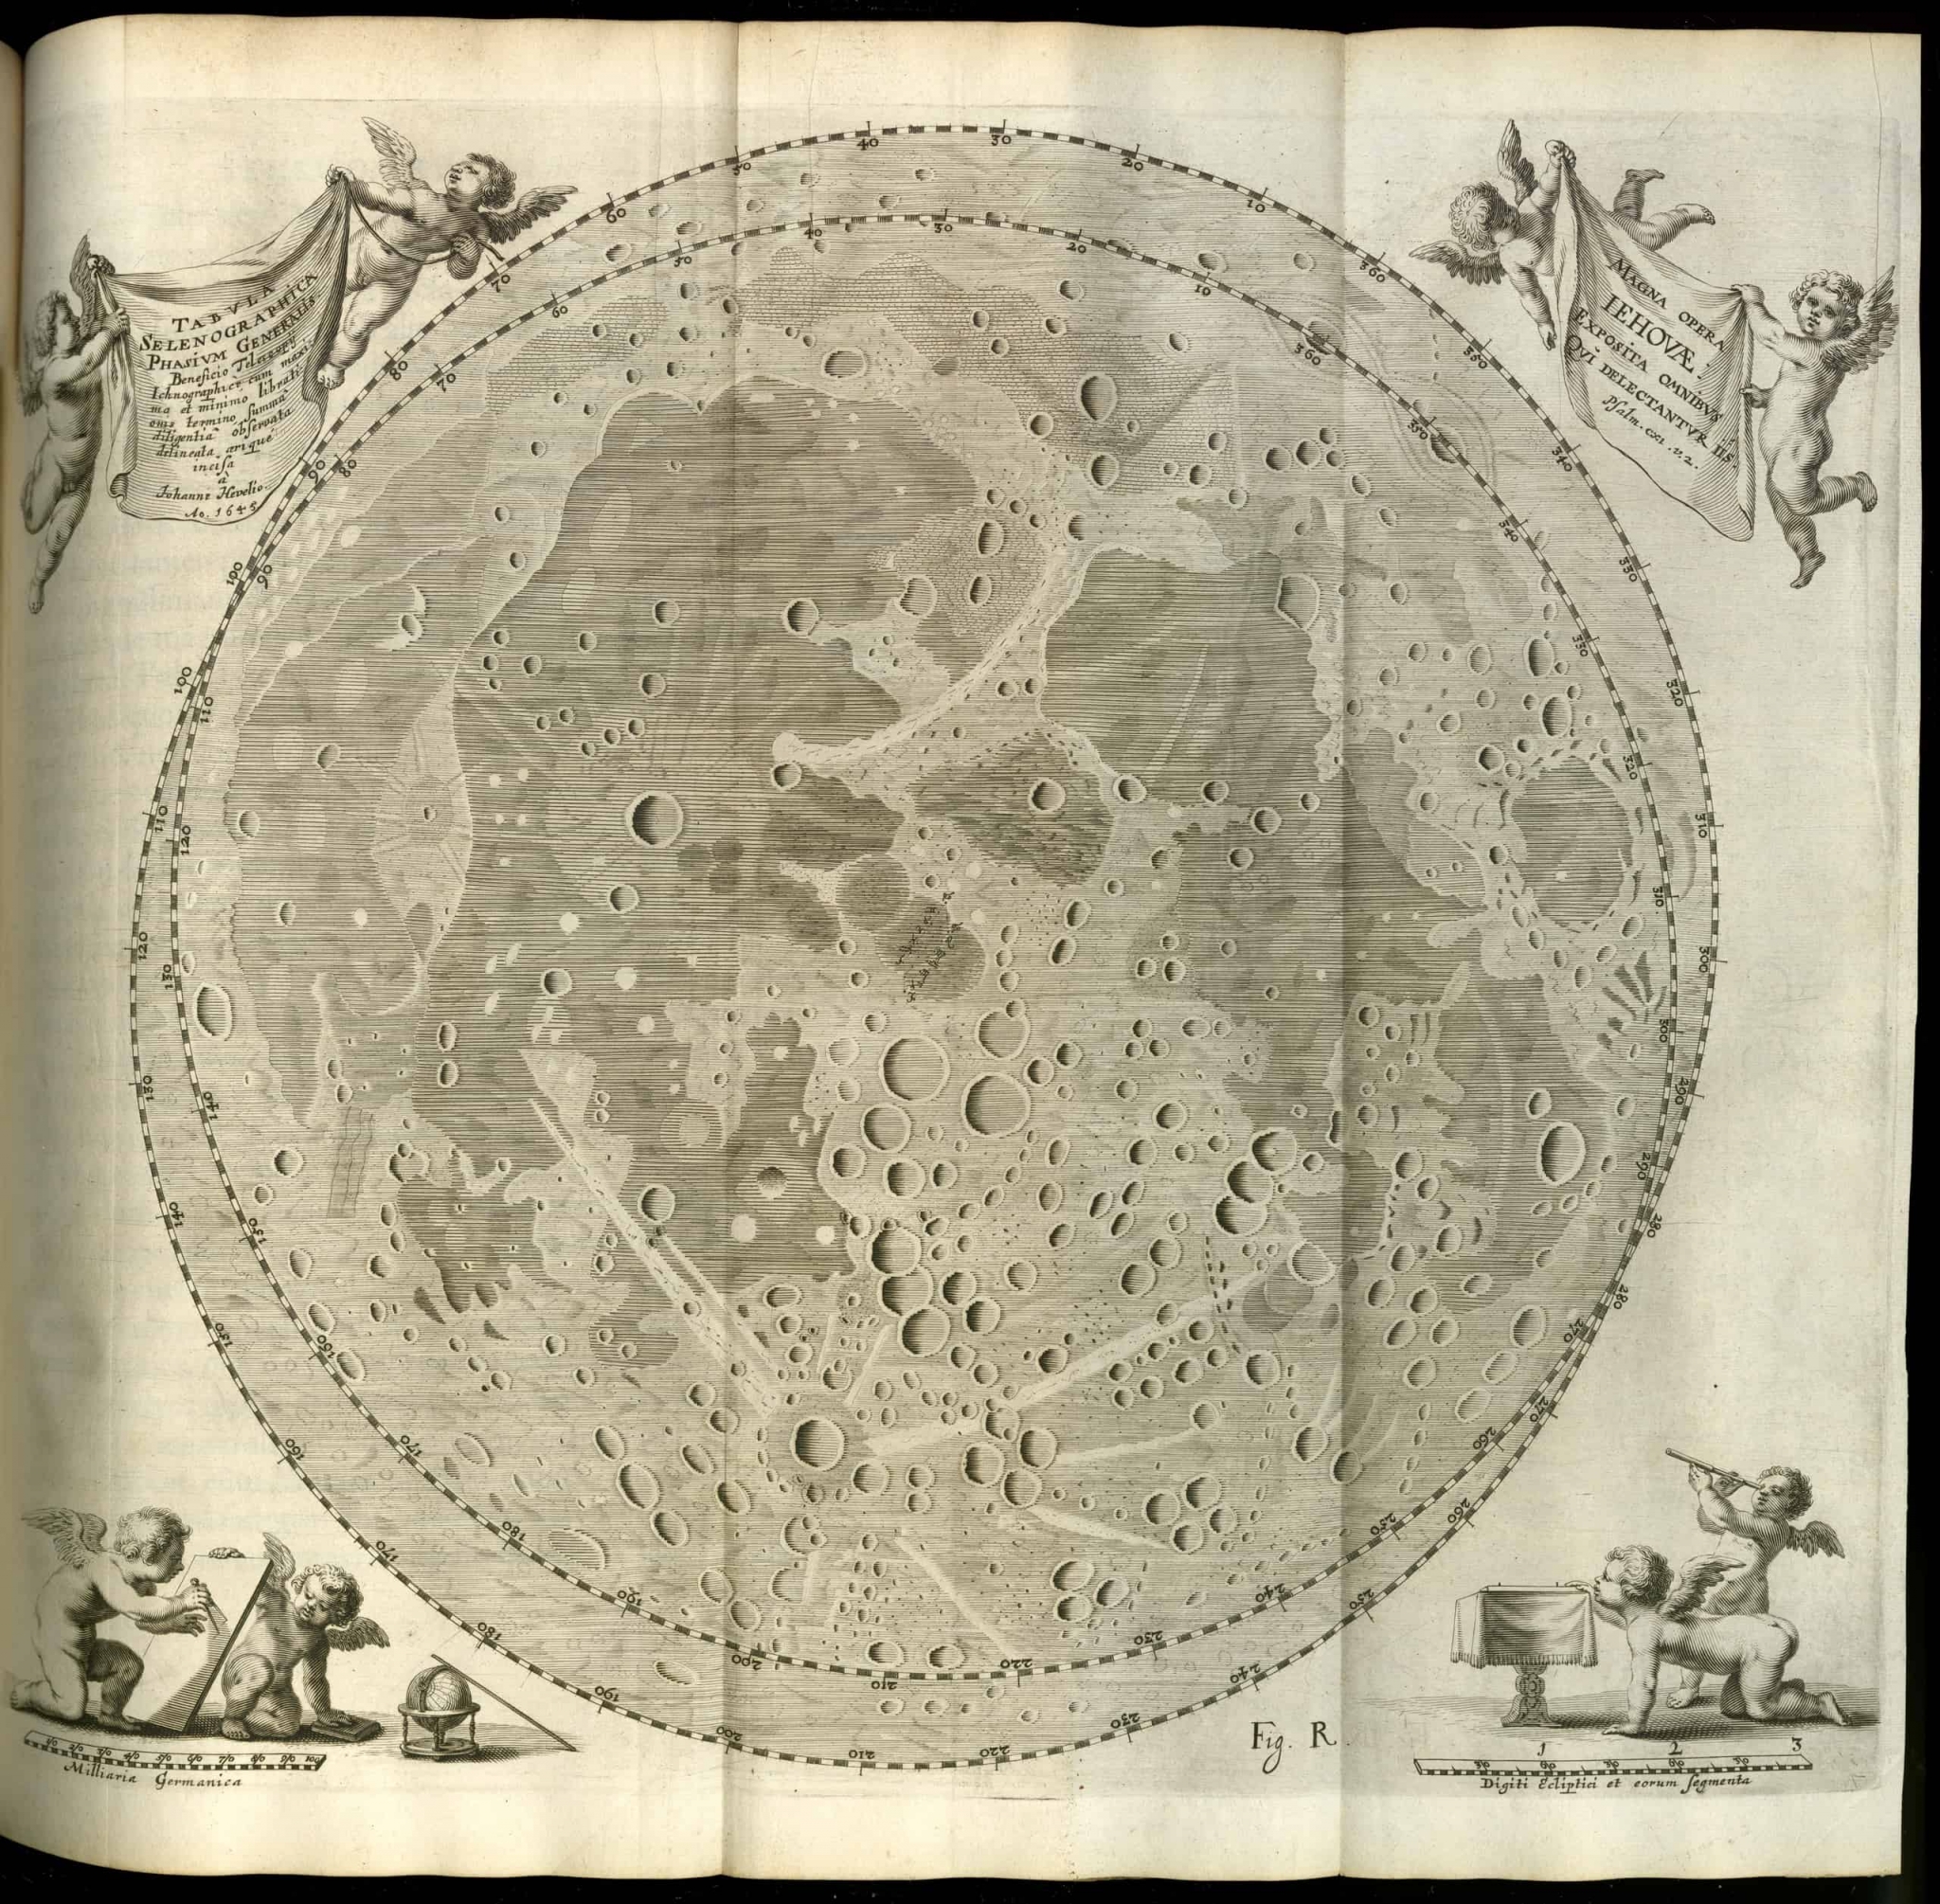 Fold out map of the moon from Johann Hevelius, Selenographia